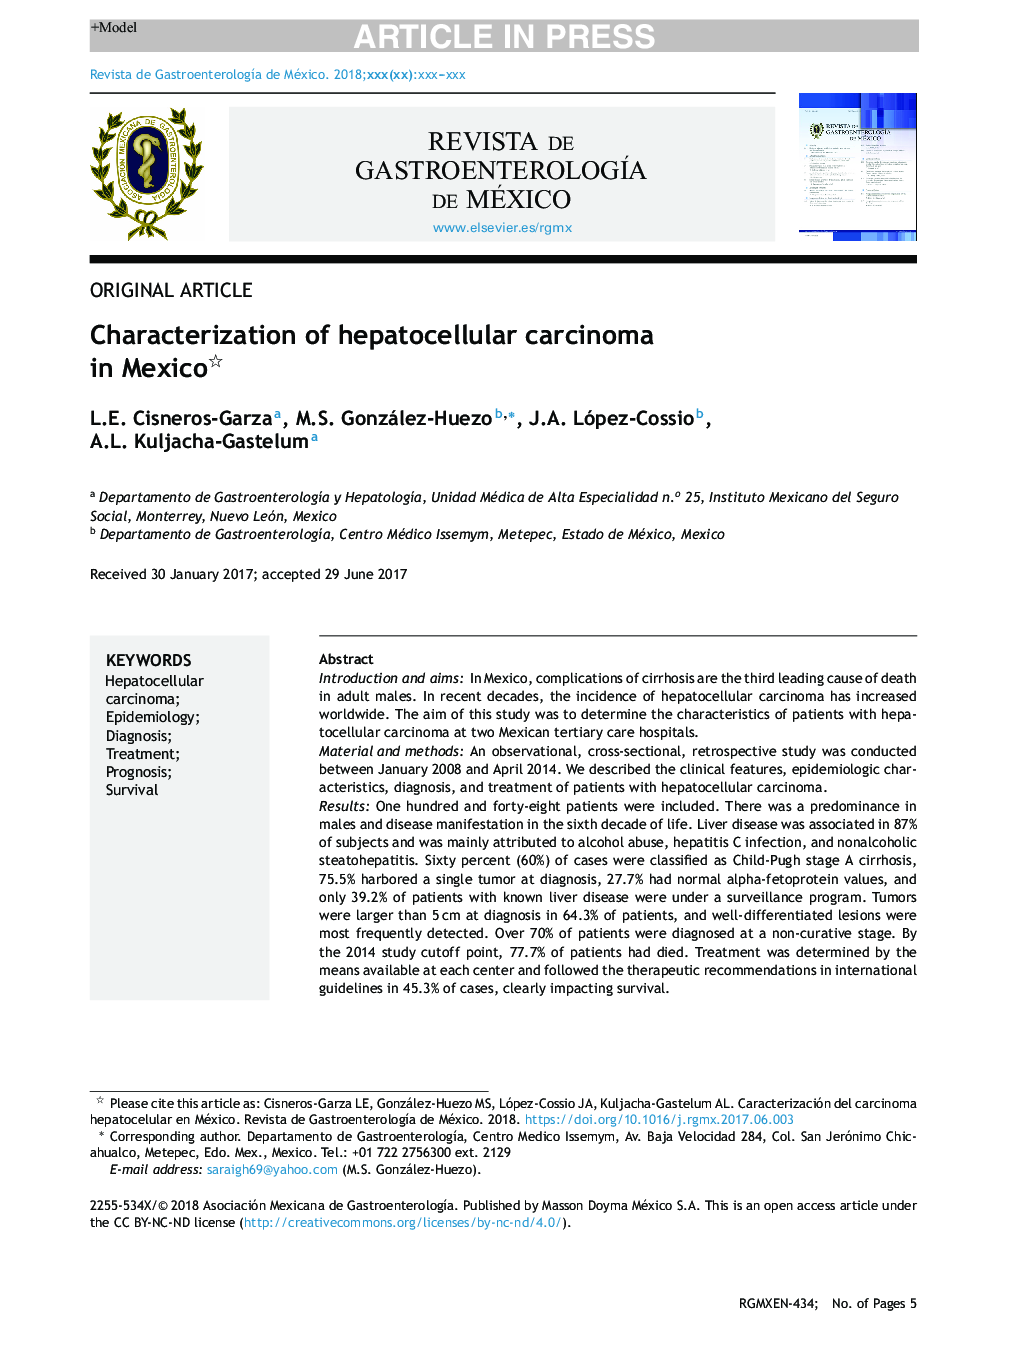 Characterization of hepatocellular carcinoma in Mexico